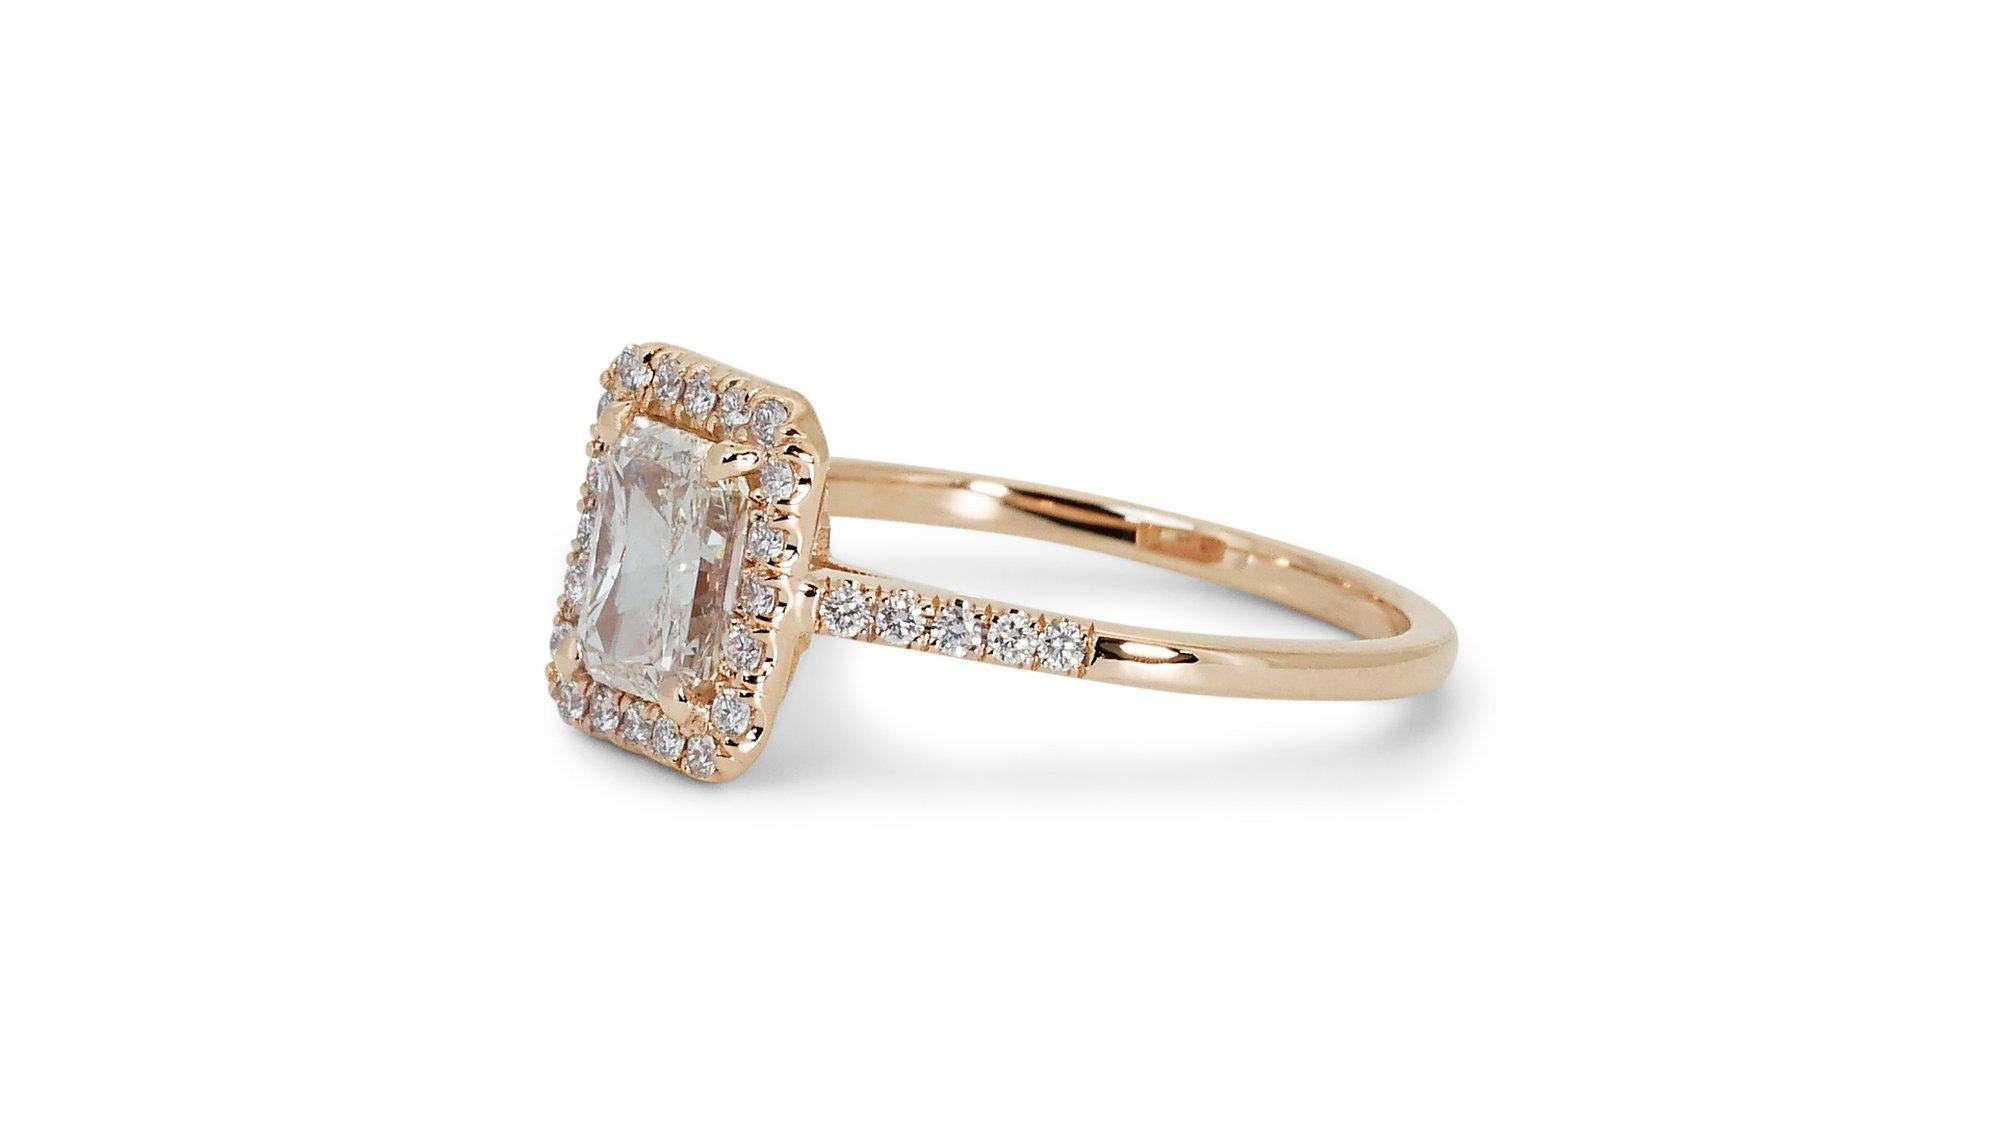 Radiant 18k Yellow Gold Natural Diamond Halo Ring w/1.75 ct - GIA Certified

This captivating diamond halo ring showcases a bold and modern design, featuring a stunning 1.50 carat cut-cornered rectangular diamond center stone, accentuated by 30